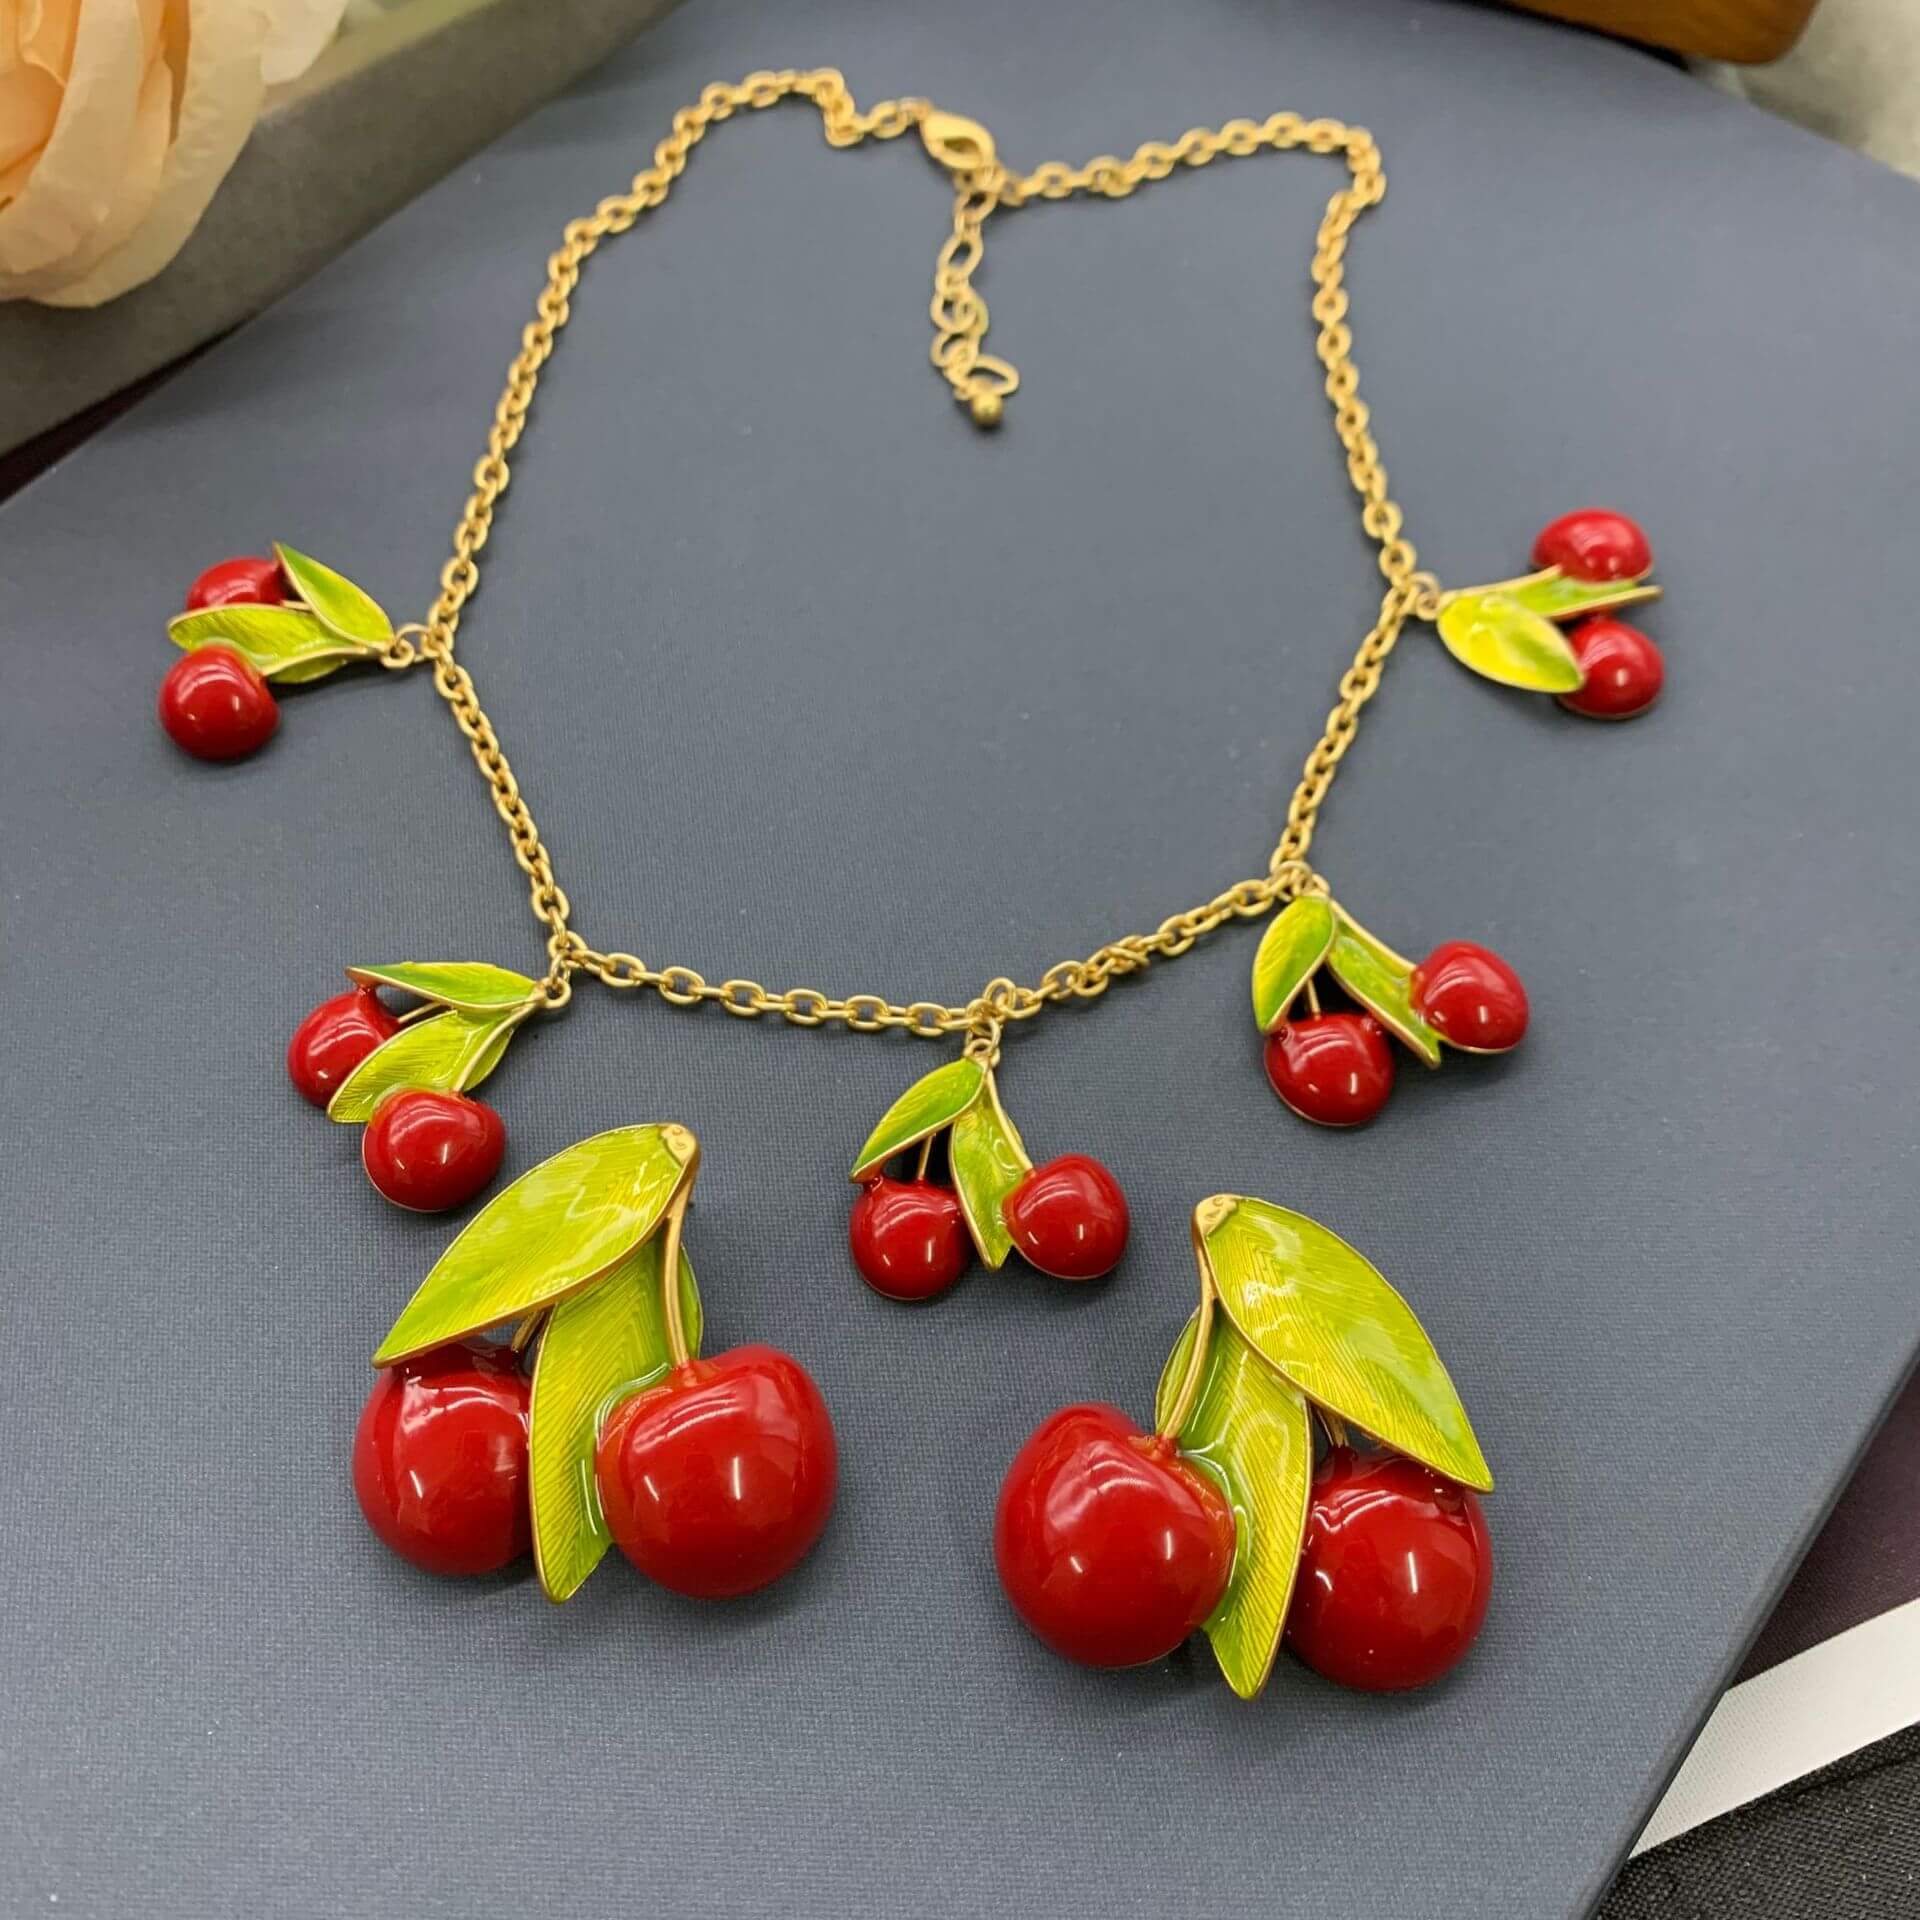 Fresh and Elegant Cherry Red Dripping Oil Necklace and Earrings Set  UponBasics 2PCS-SET Red 